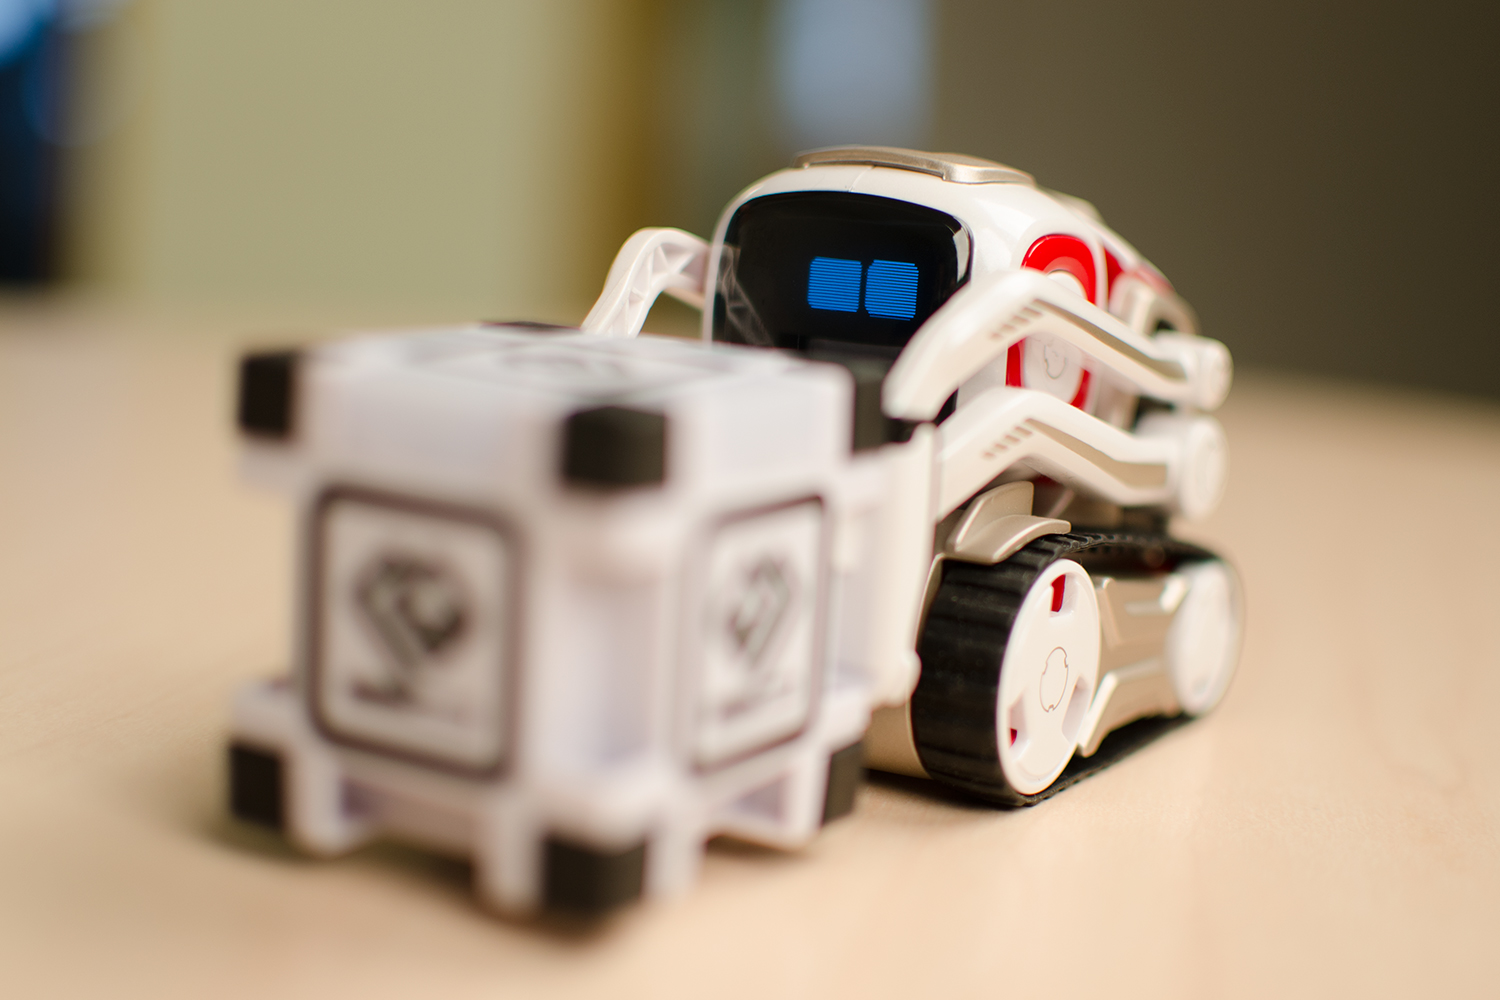 Anki Makes Cozmo a Little Needier with New App